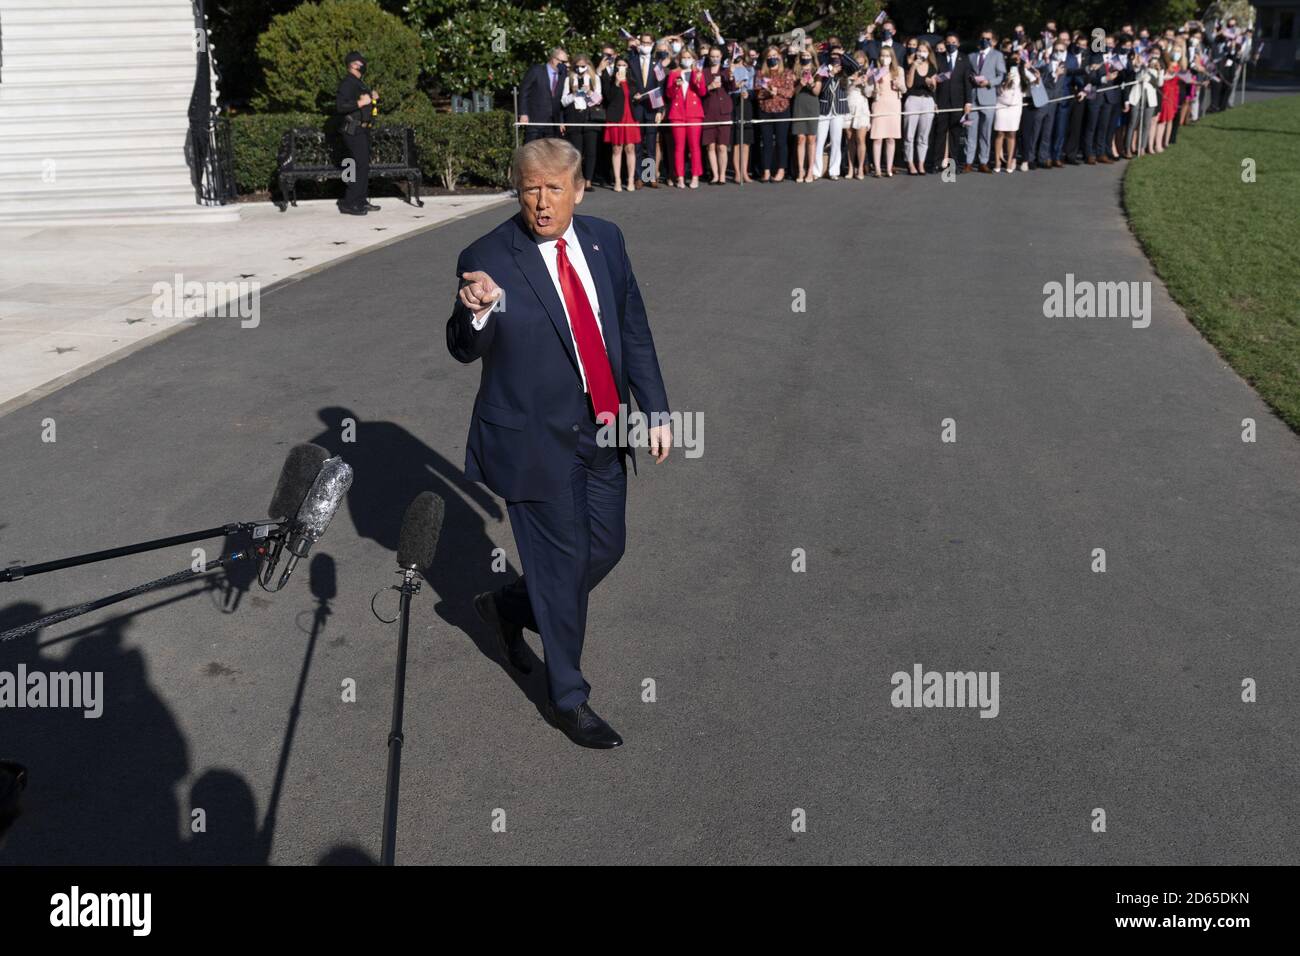 Washington, United States. 14th Oct, 2020. U.S. President Donald J. Trump speaks to the media as he departs the White House enroute to a political event in Des Moines, Iowa, in Washington DC, on Wednesday, October 14, 2020. Photo by Chris Kleponis/UPI Credit: UPI/Alamy Live News Stock Photo